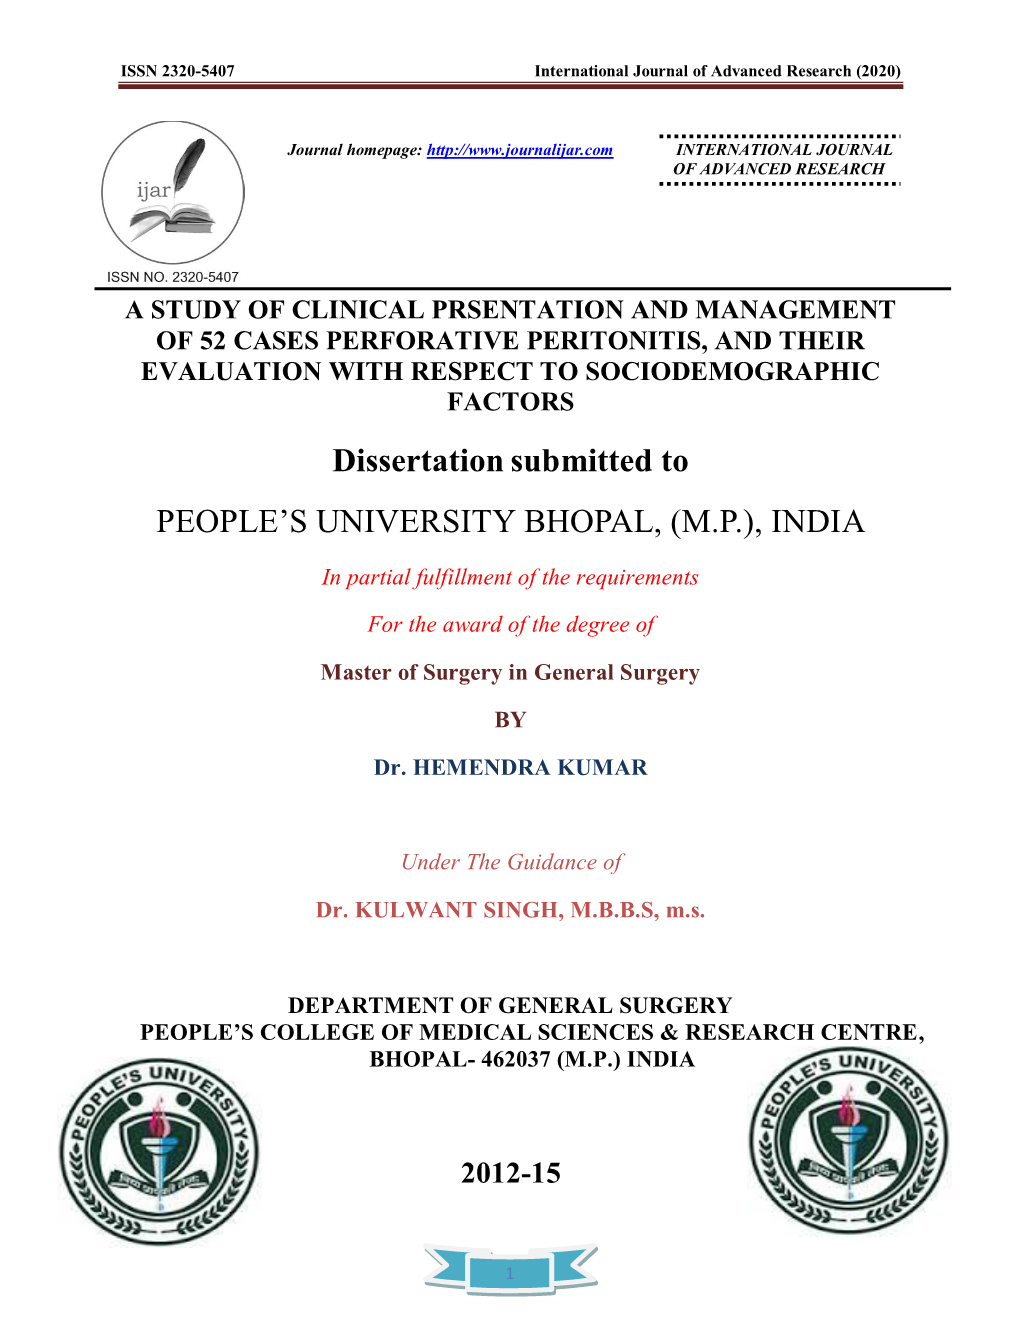 Dissertation Submitted to PEOPLE's UNIVERSITY BHOPAL, (M.P.), INDIA